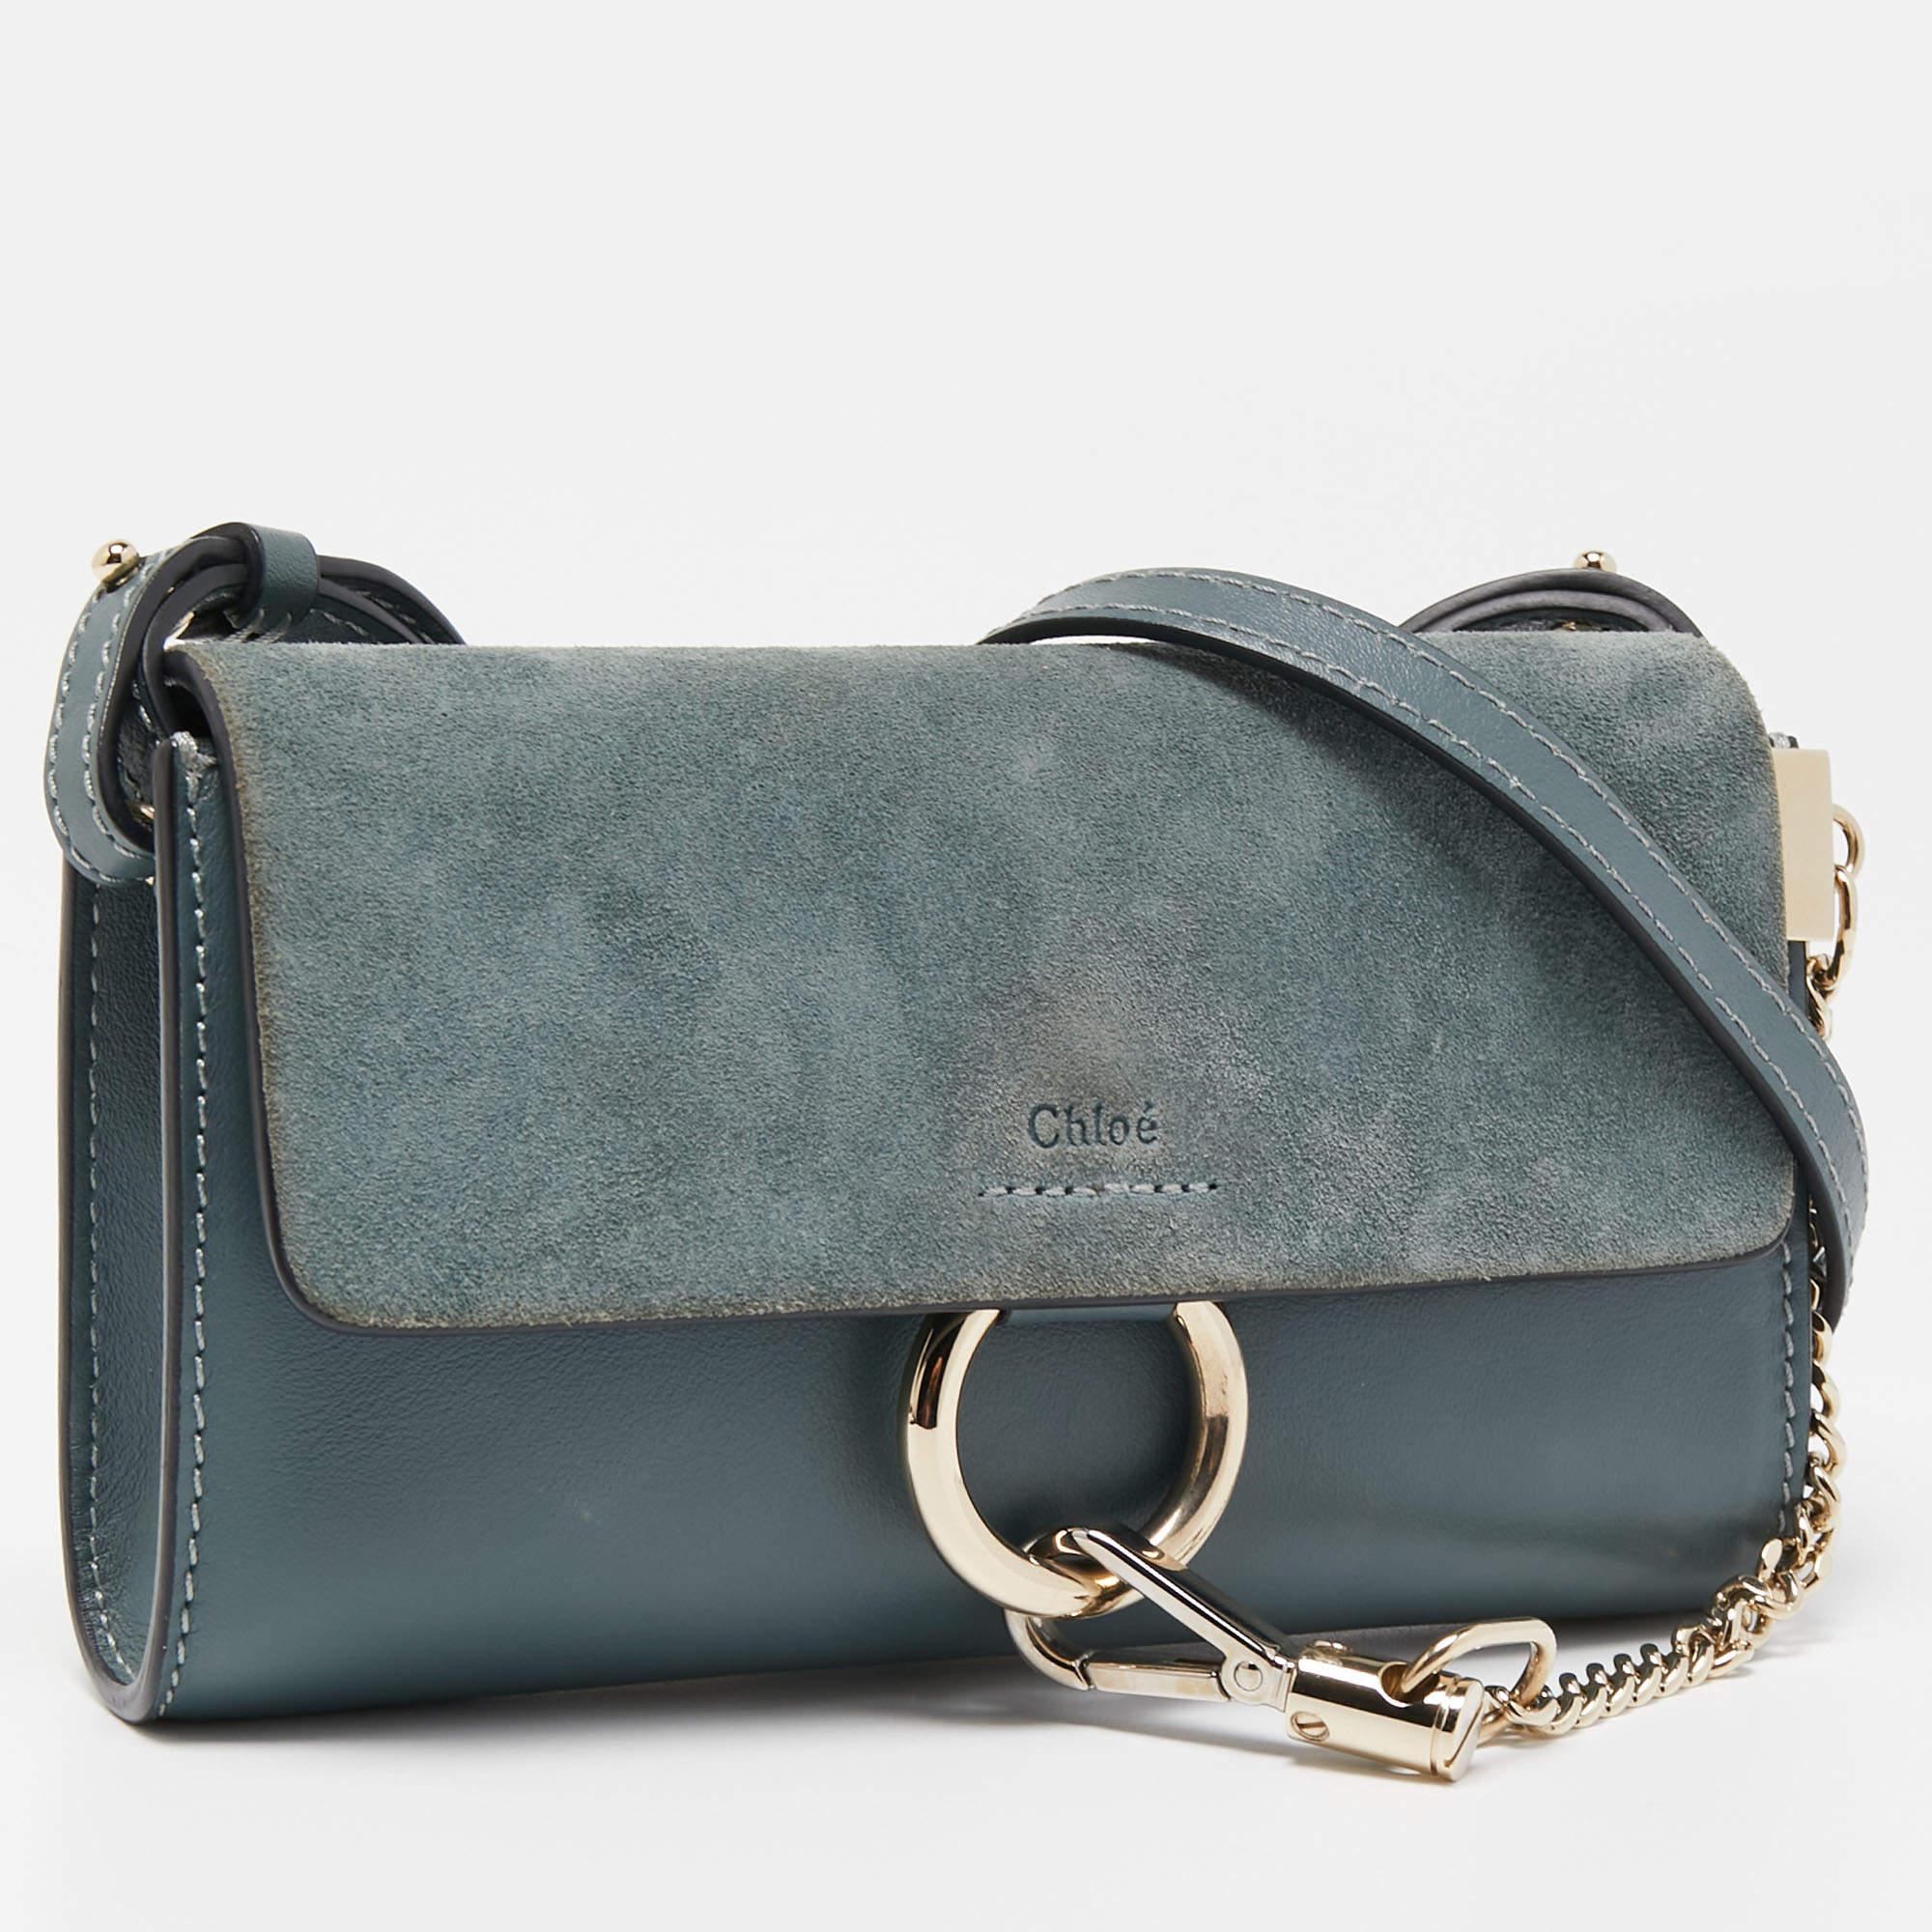 You are going to love owning this Faye shoulder bag from Chloe as it is well-made and brimming with luxury. The bag has been crafted from leather and designed with a suede flap that has a chain detail and a well-sized suede compartment for your